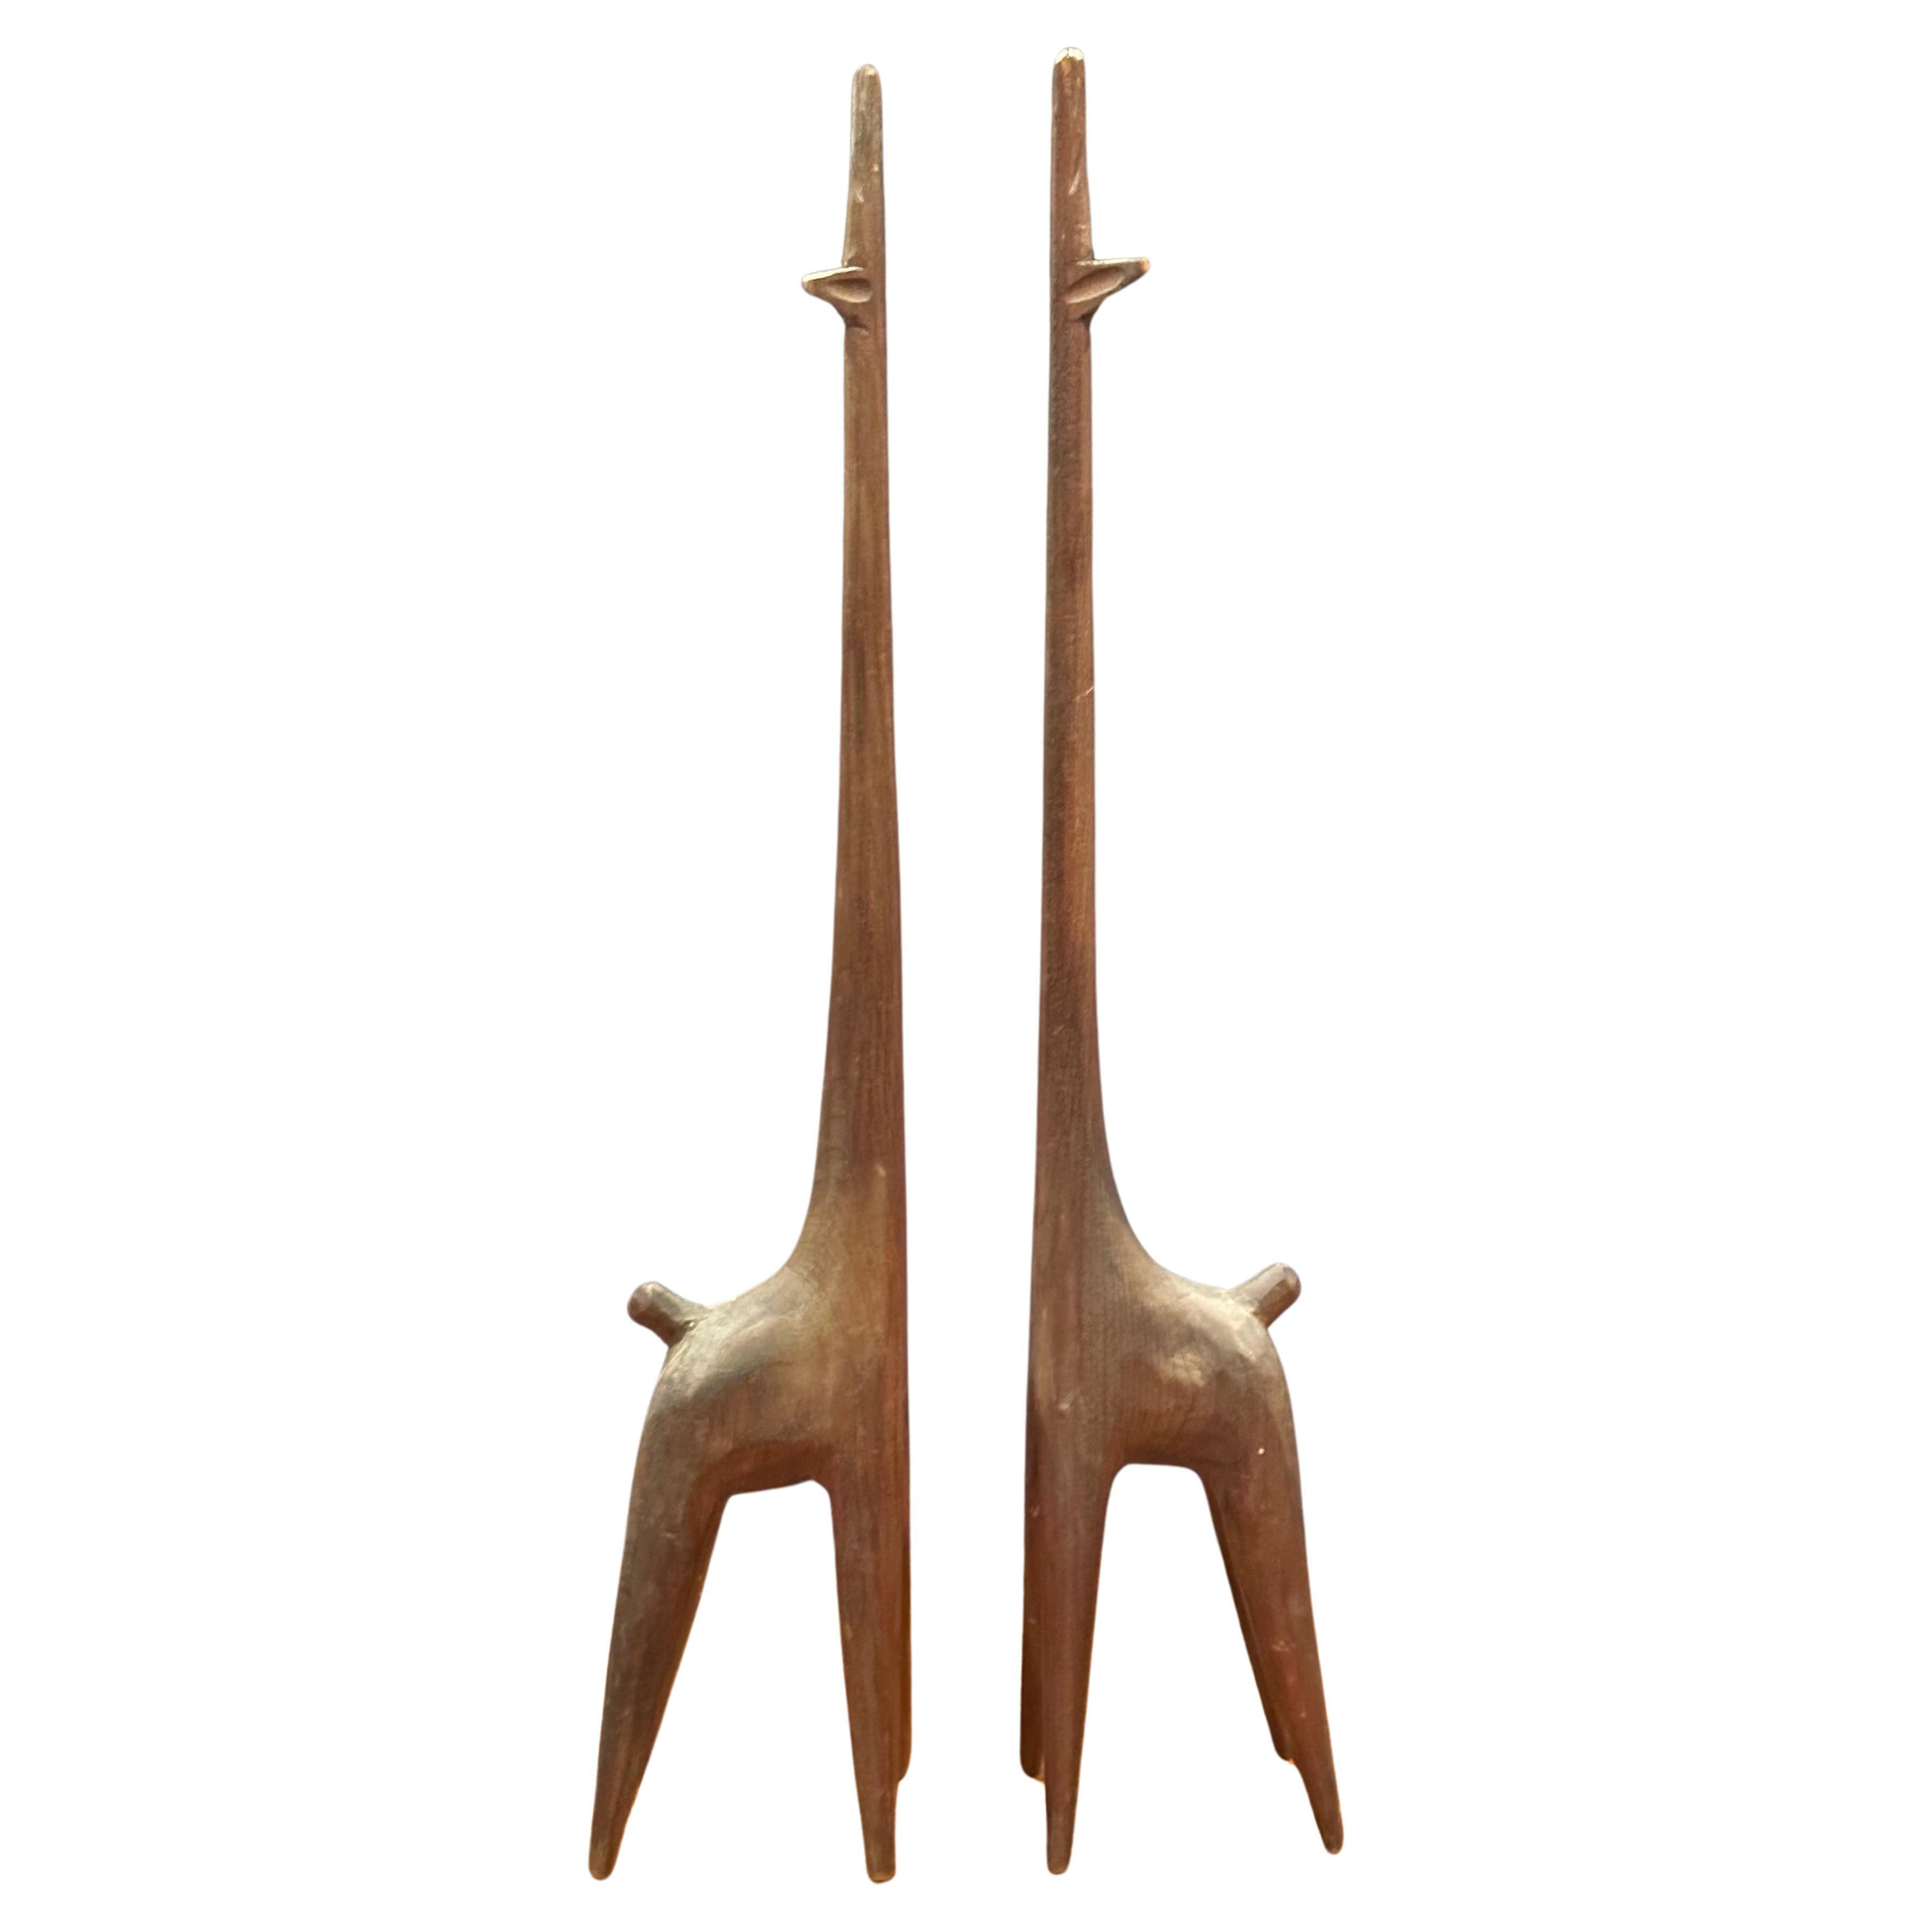 Super cool pair of modernist giraffe carved wood (walnut?) sculptures, circa 1960s. The sculptures are hand carved and measures: 2